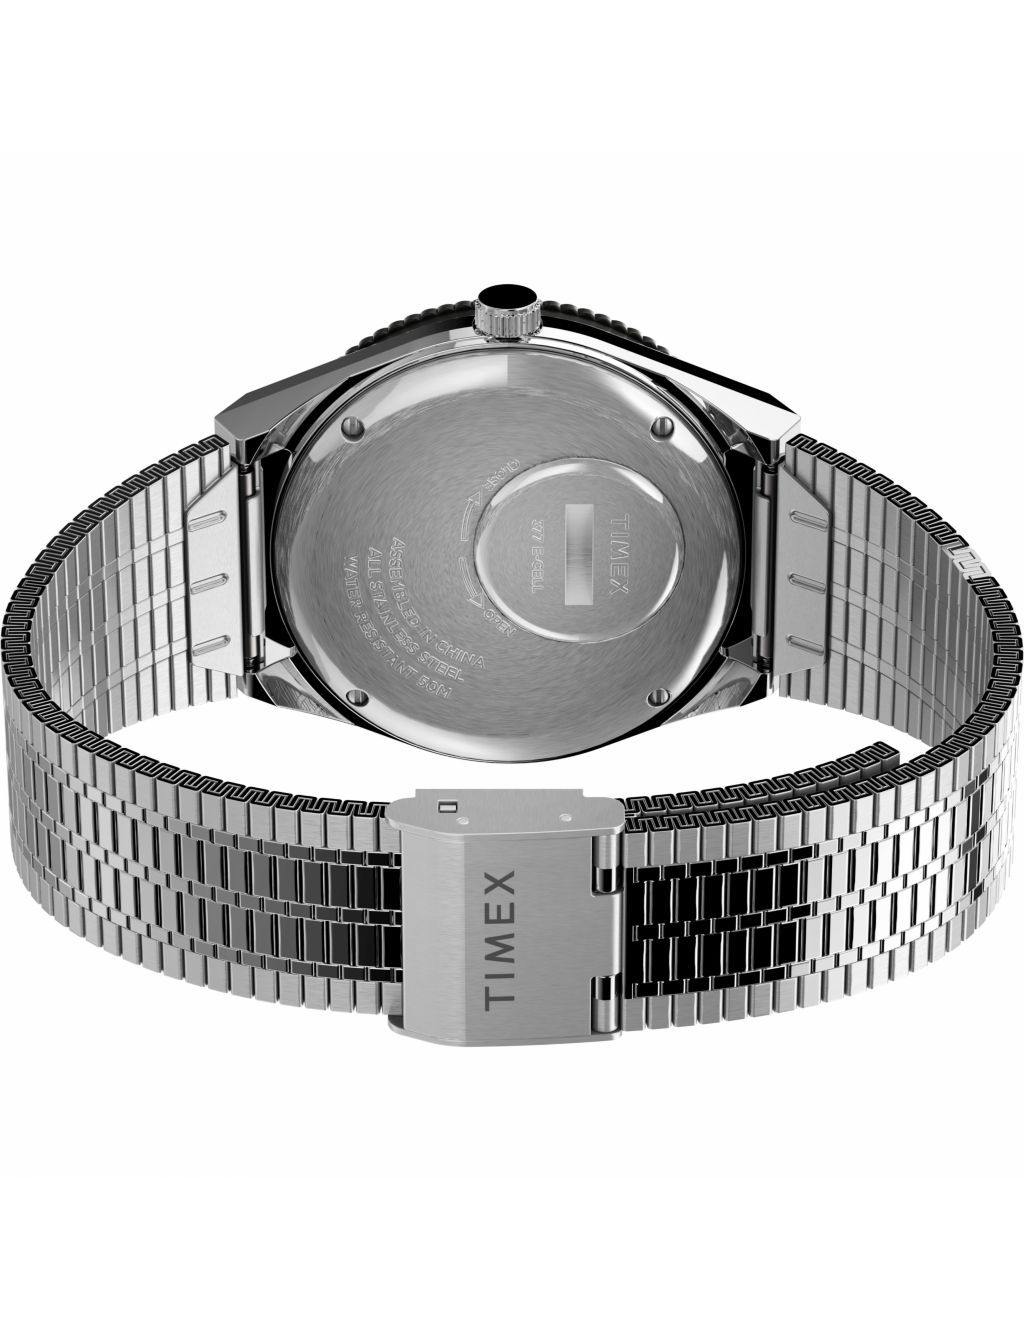 Timex Q Diver Stainless Steel Watch image 4